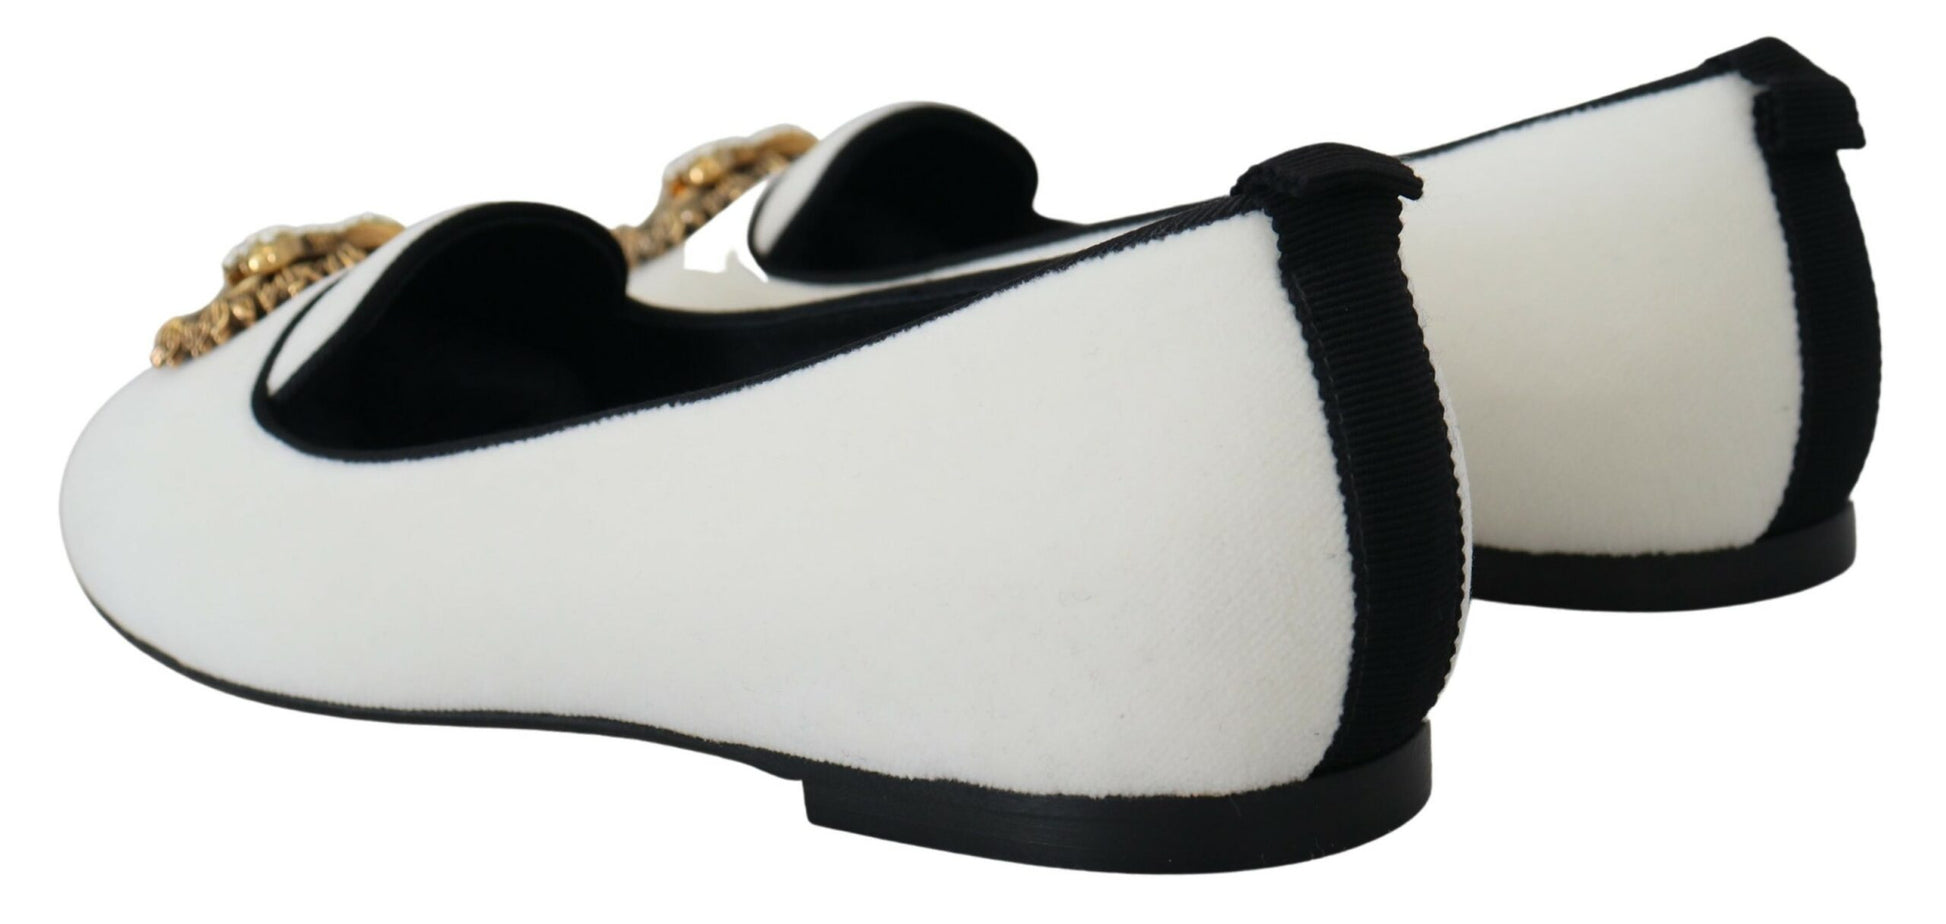 Dolce & Gabbana White Velvet Slip Ons Loafers Flats Shoes - Designed by Dolce & Gabbana Available to Buy at a Discounted Price on Moon Behind The Hill Online Designer Discount Store